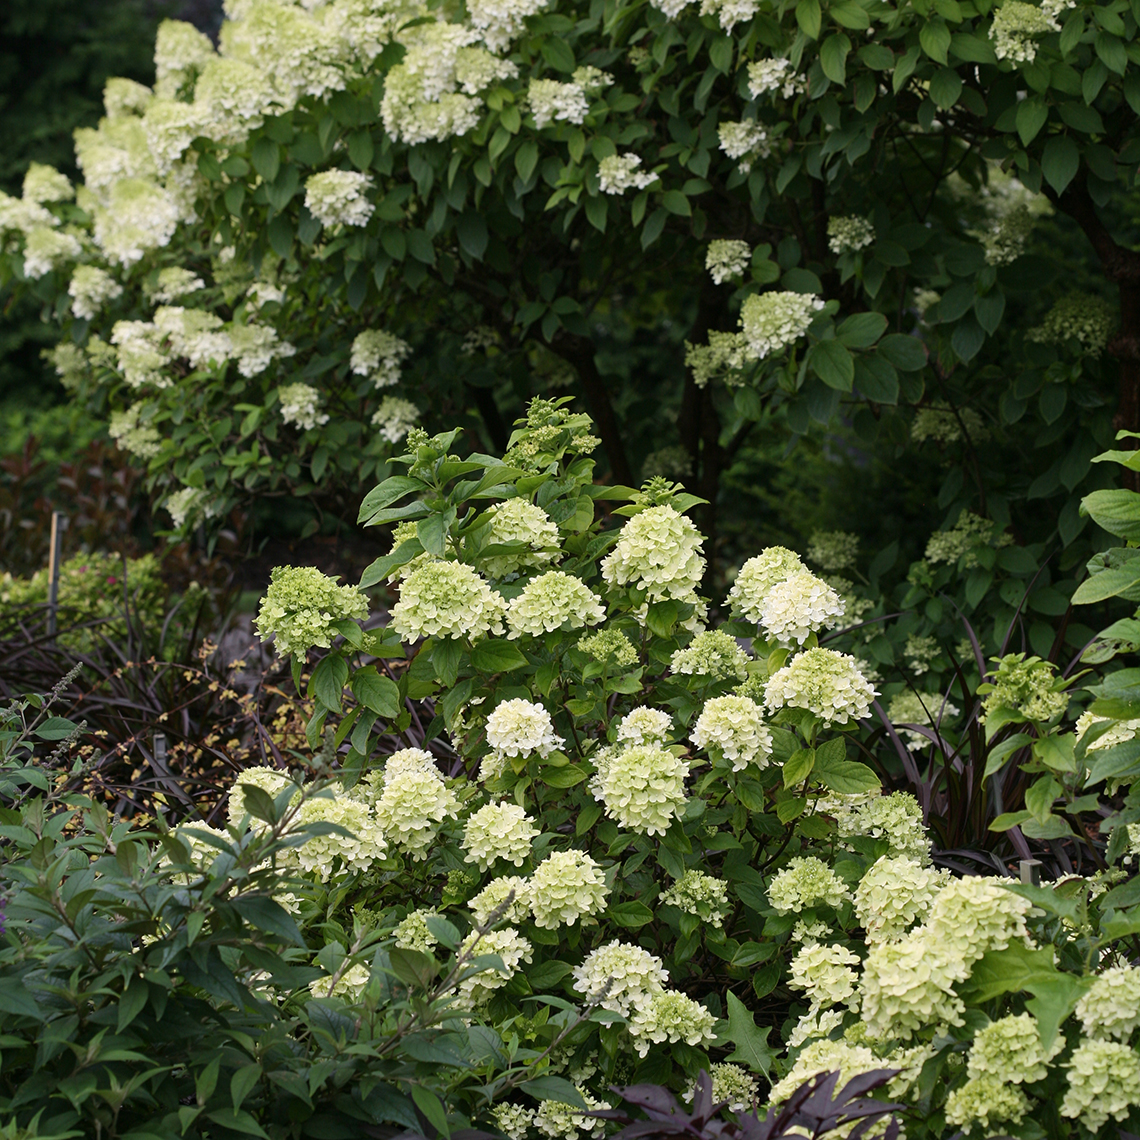 Little Lime hydrangea blooming in front of Limelgight hydrangea showing the scale of both